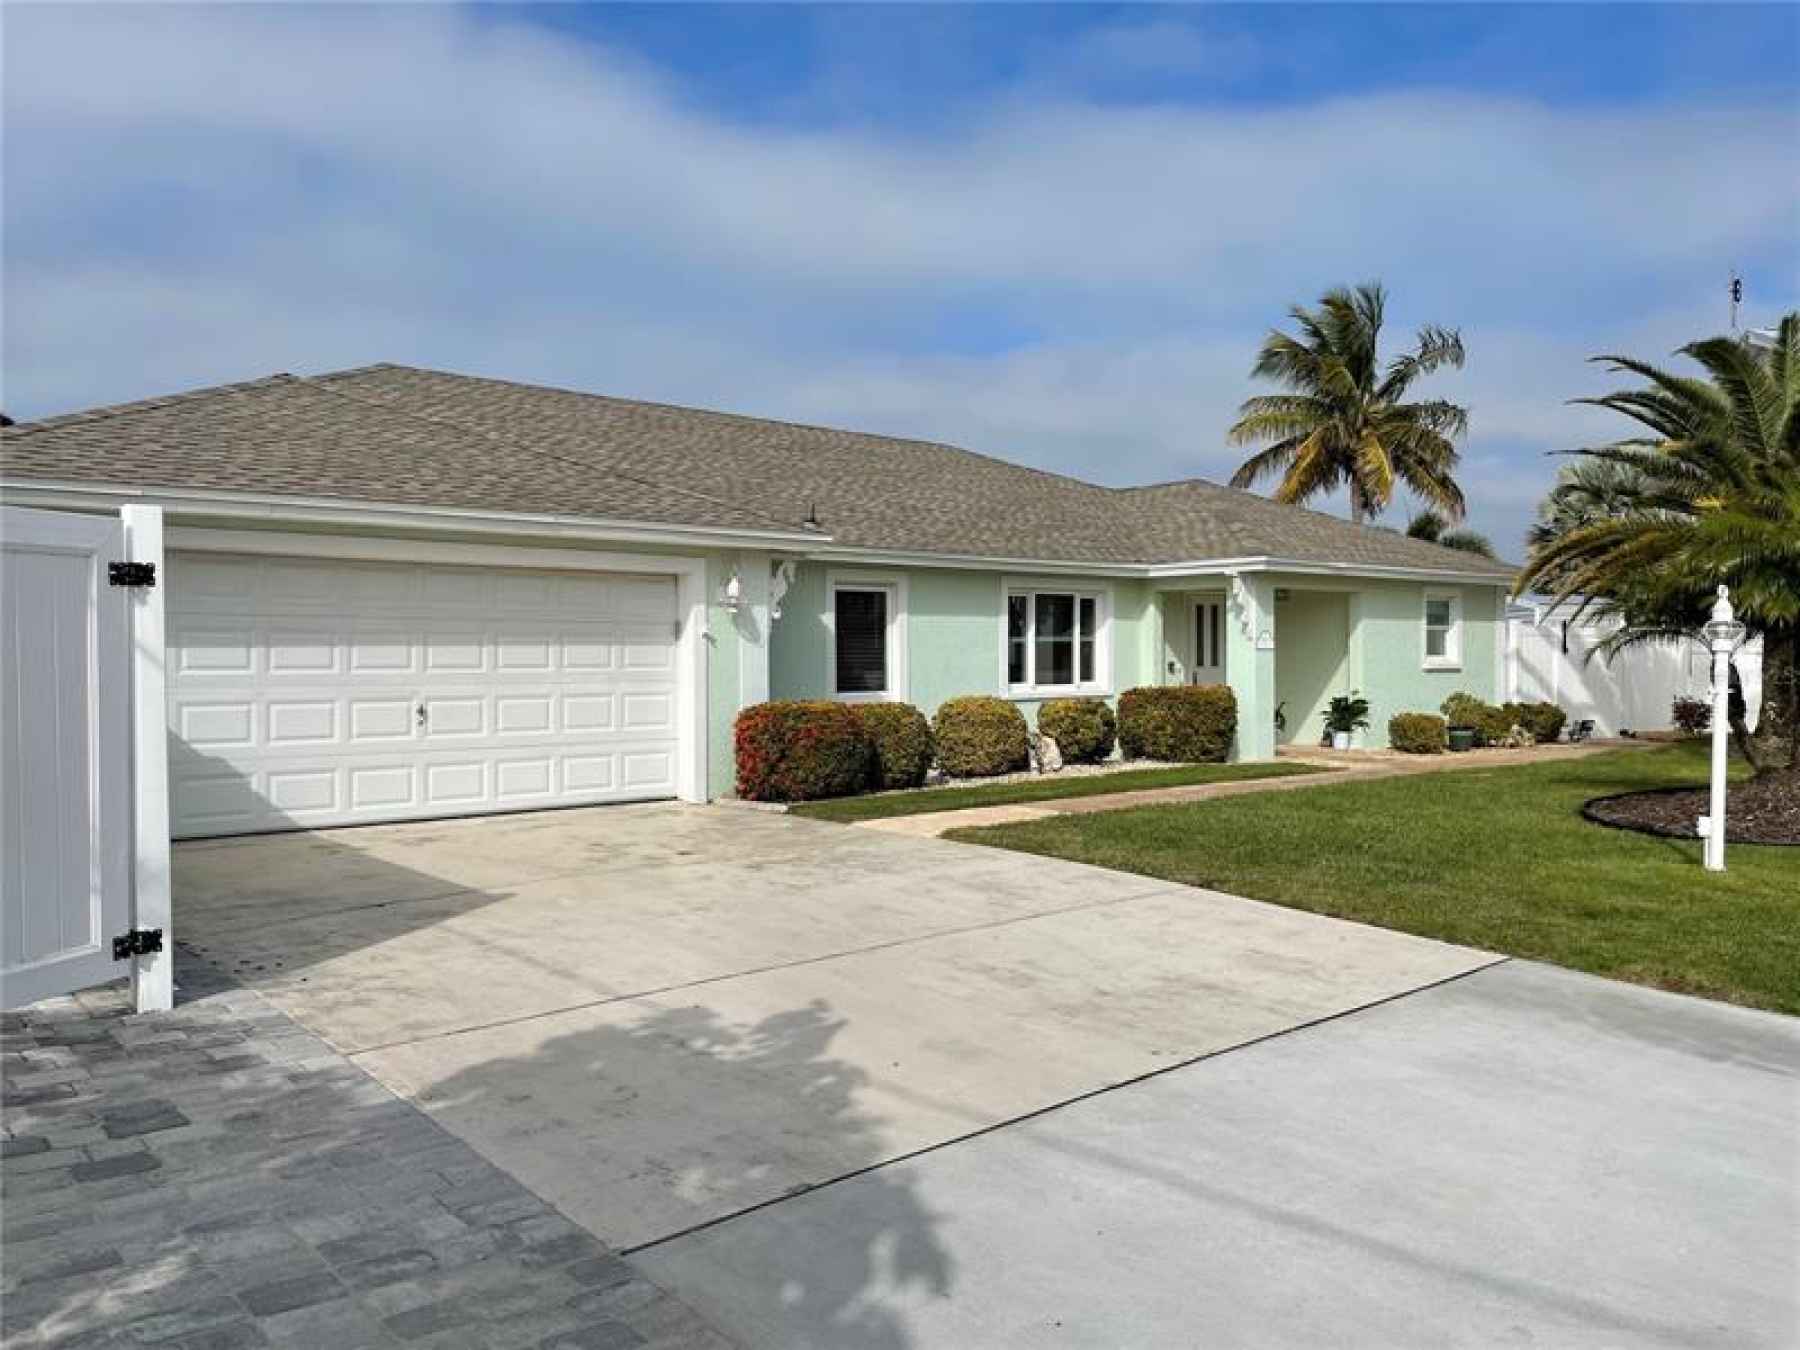 A 2367 Square Feet, 3 Bedrooms, 2.5 Bath, Pool home, 2 car garage, outdoor storage for your boating 